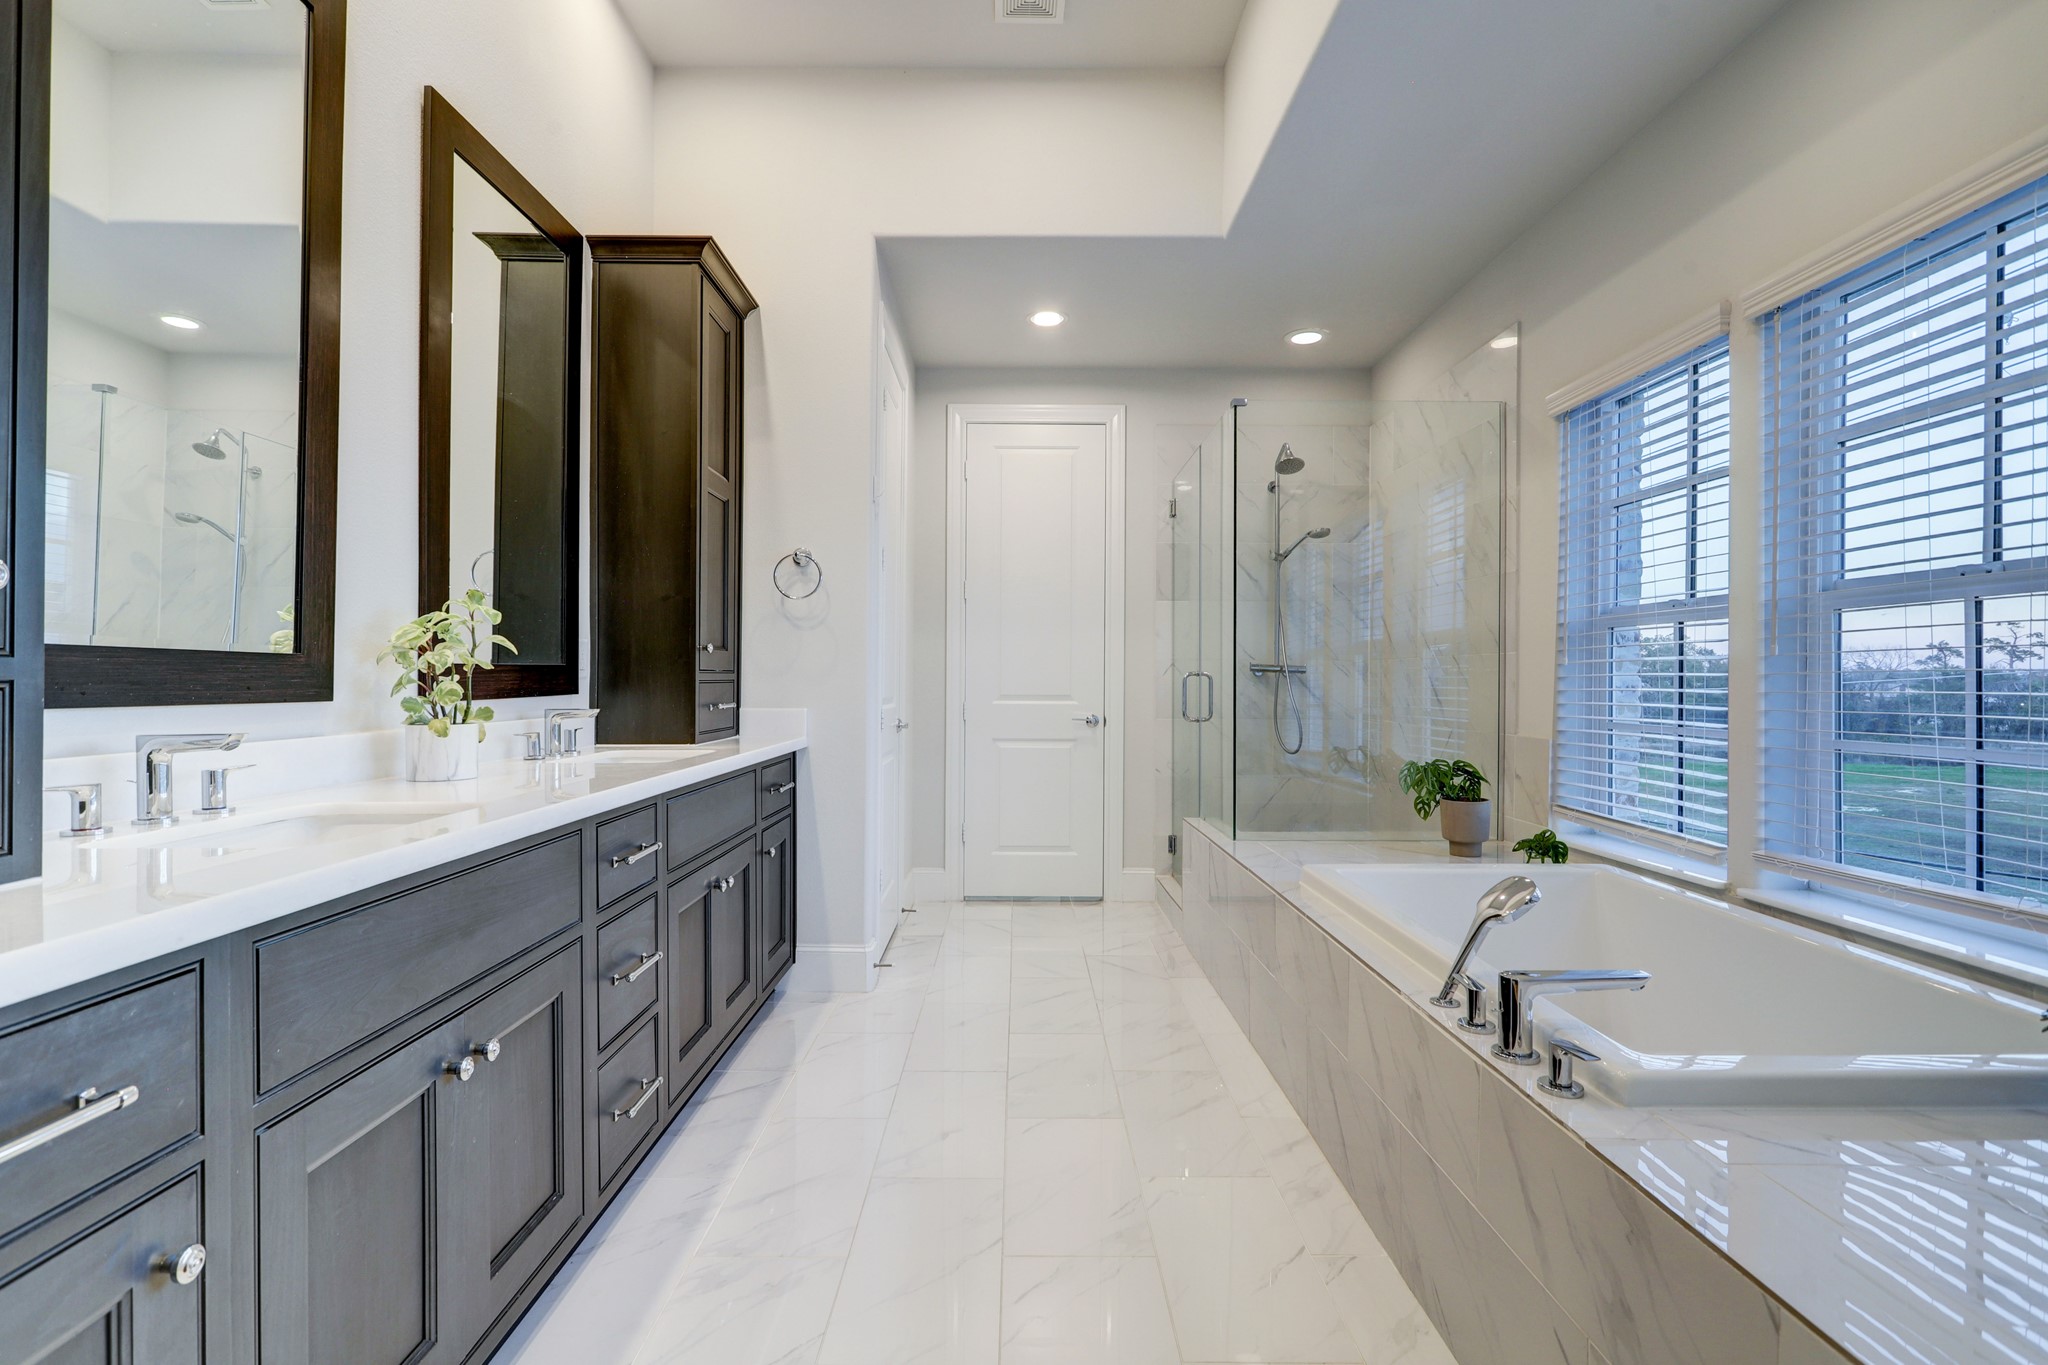 The soothing color pallet and soft finishes of this primary bathroom are genuinely inviting. Wind down the day in the soaker tub complete with a hand held shower wand on the tub-deck. Or enjoy the frameless glass shower complete with a comfort bench.